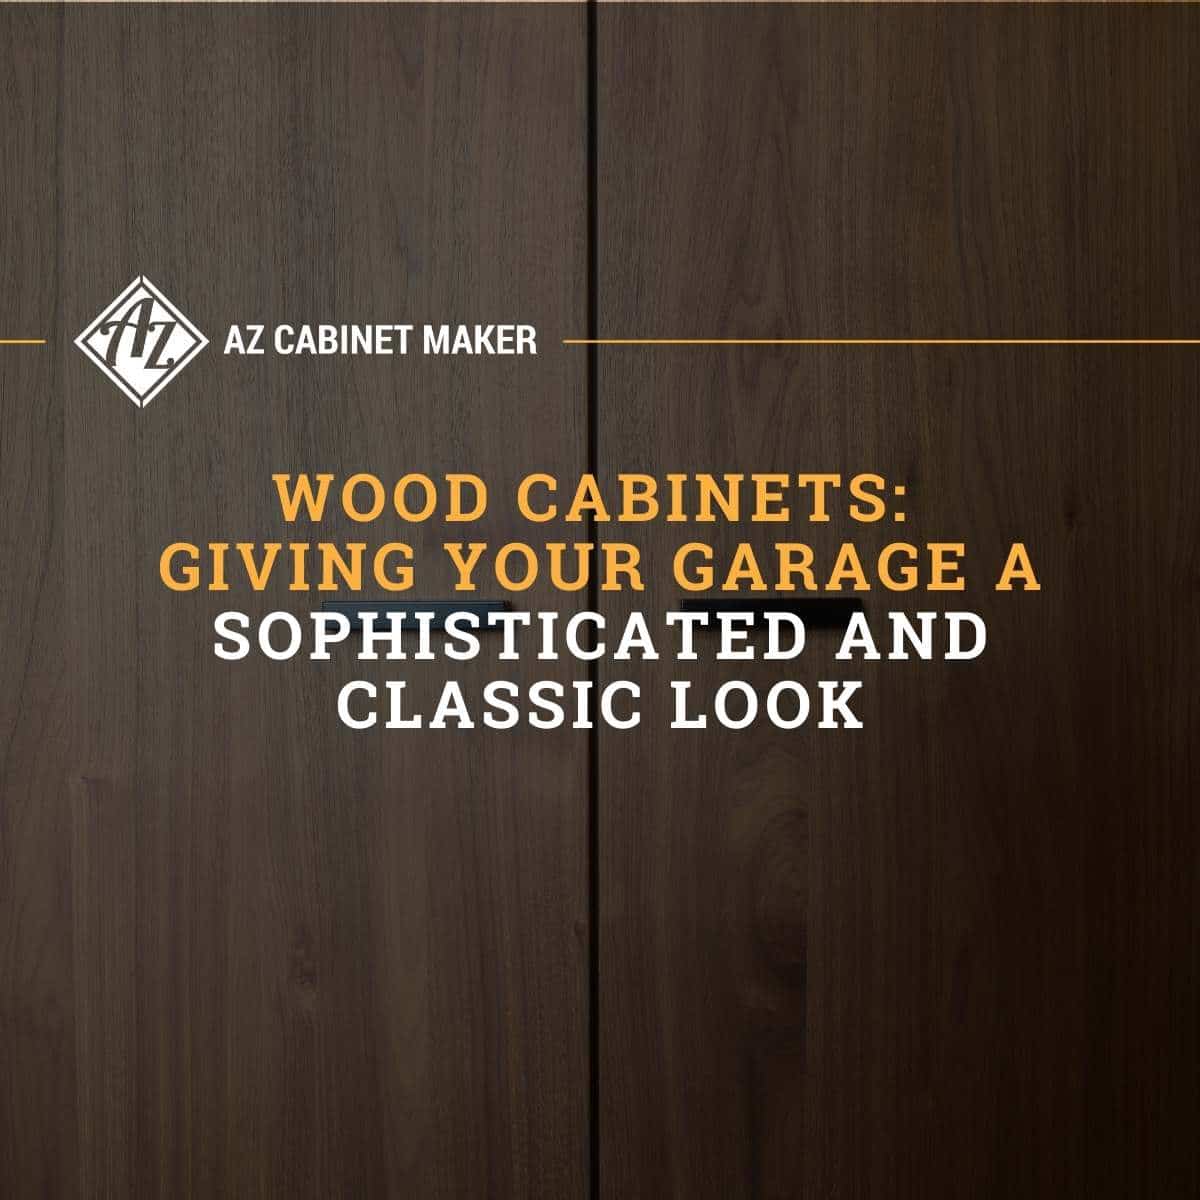 Wood Cabinets: Giving Your Garage A Sophisticated & Classic Look